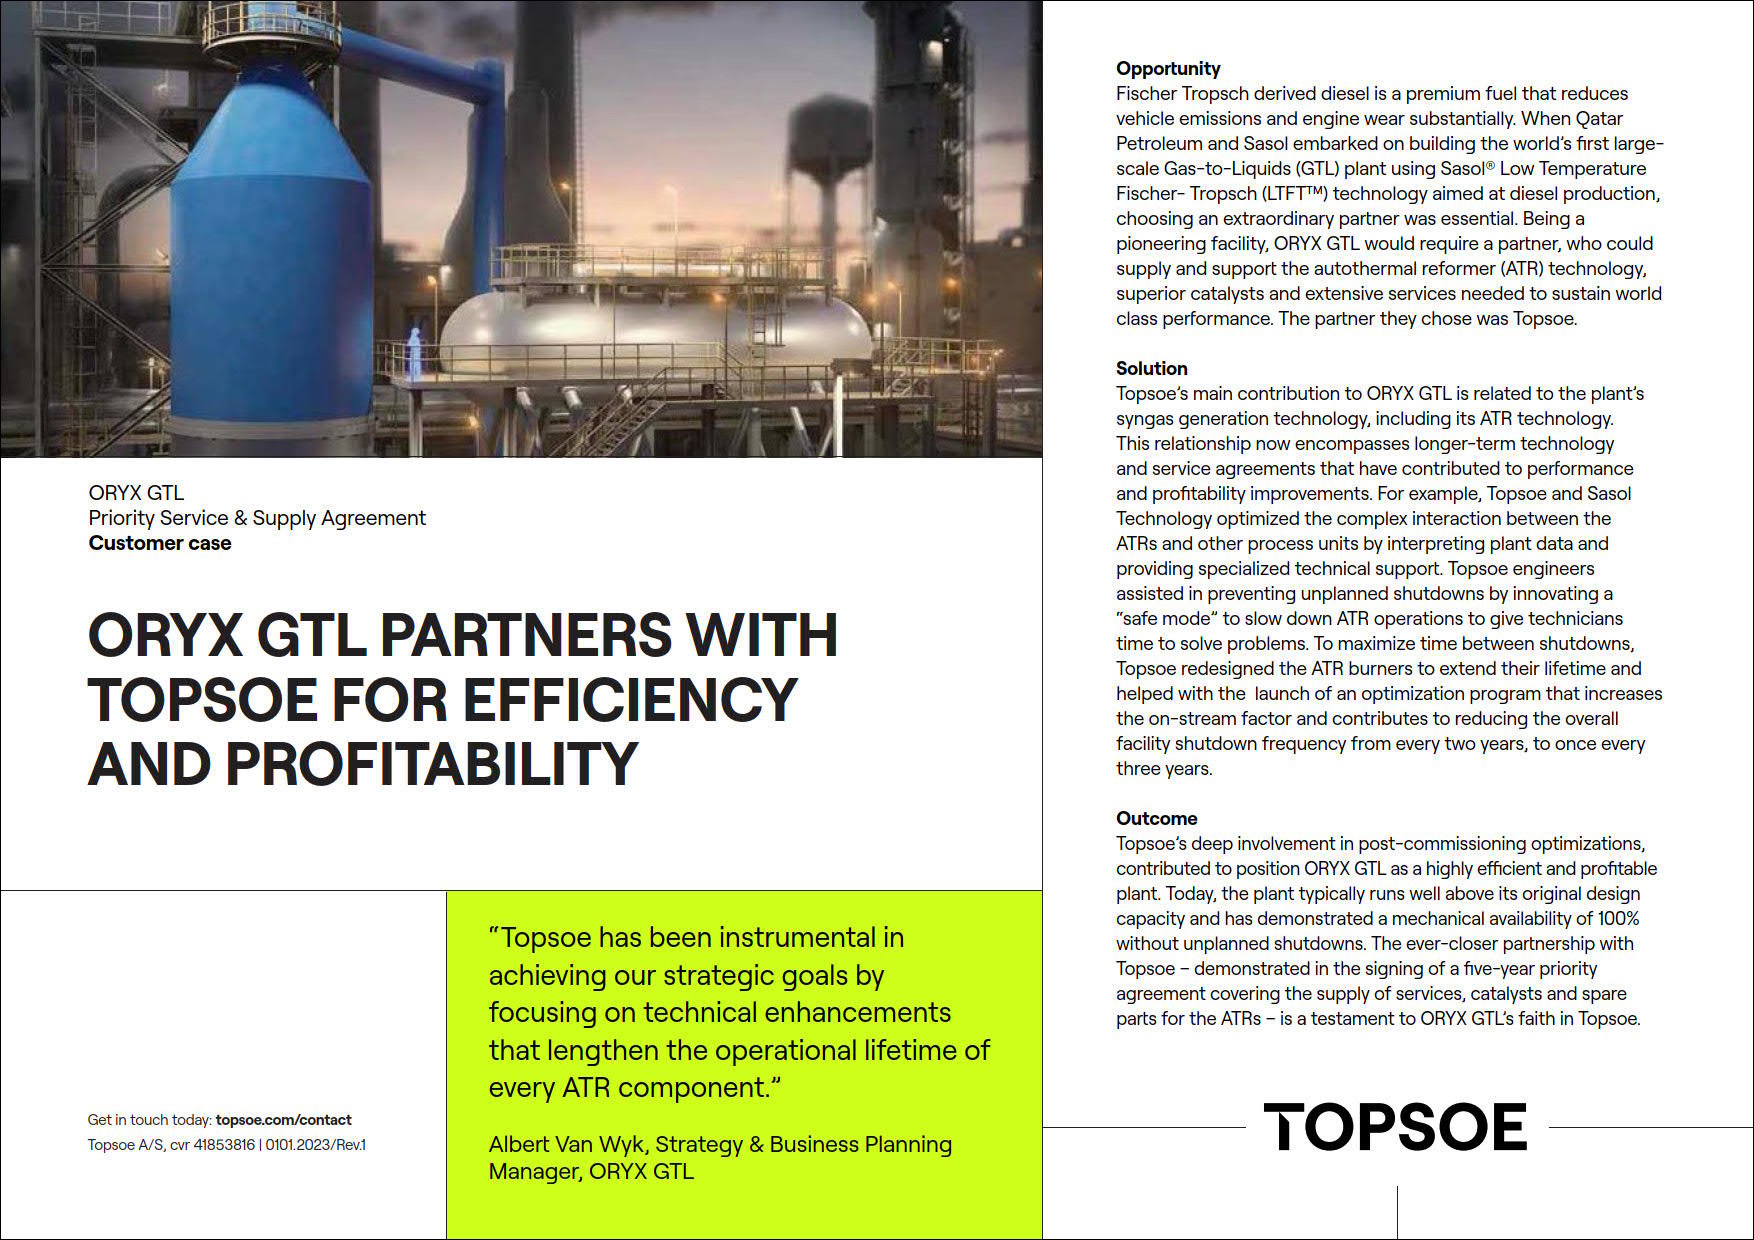 ORYX GTL partners with Topsoe for efficiency and profitability